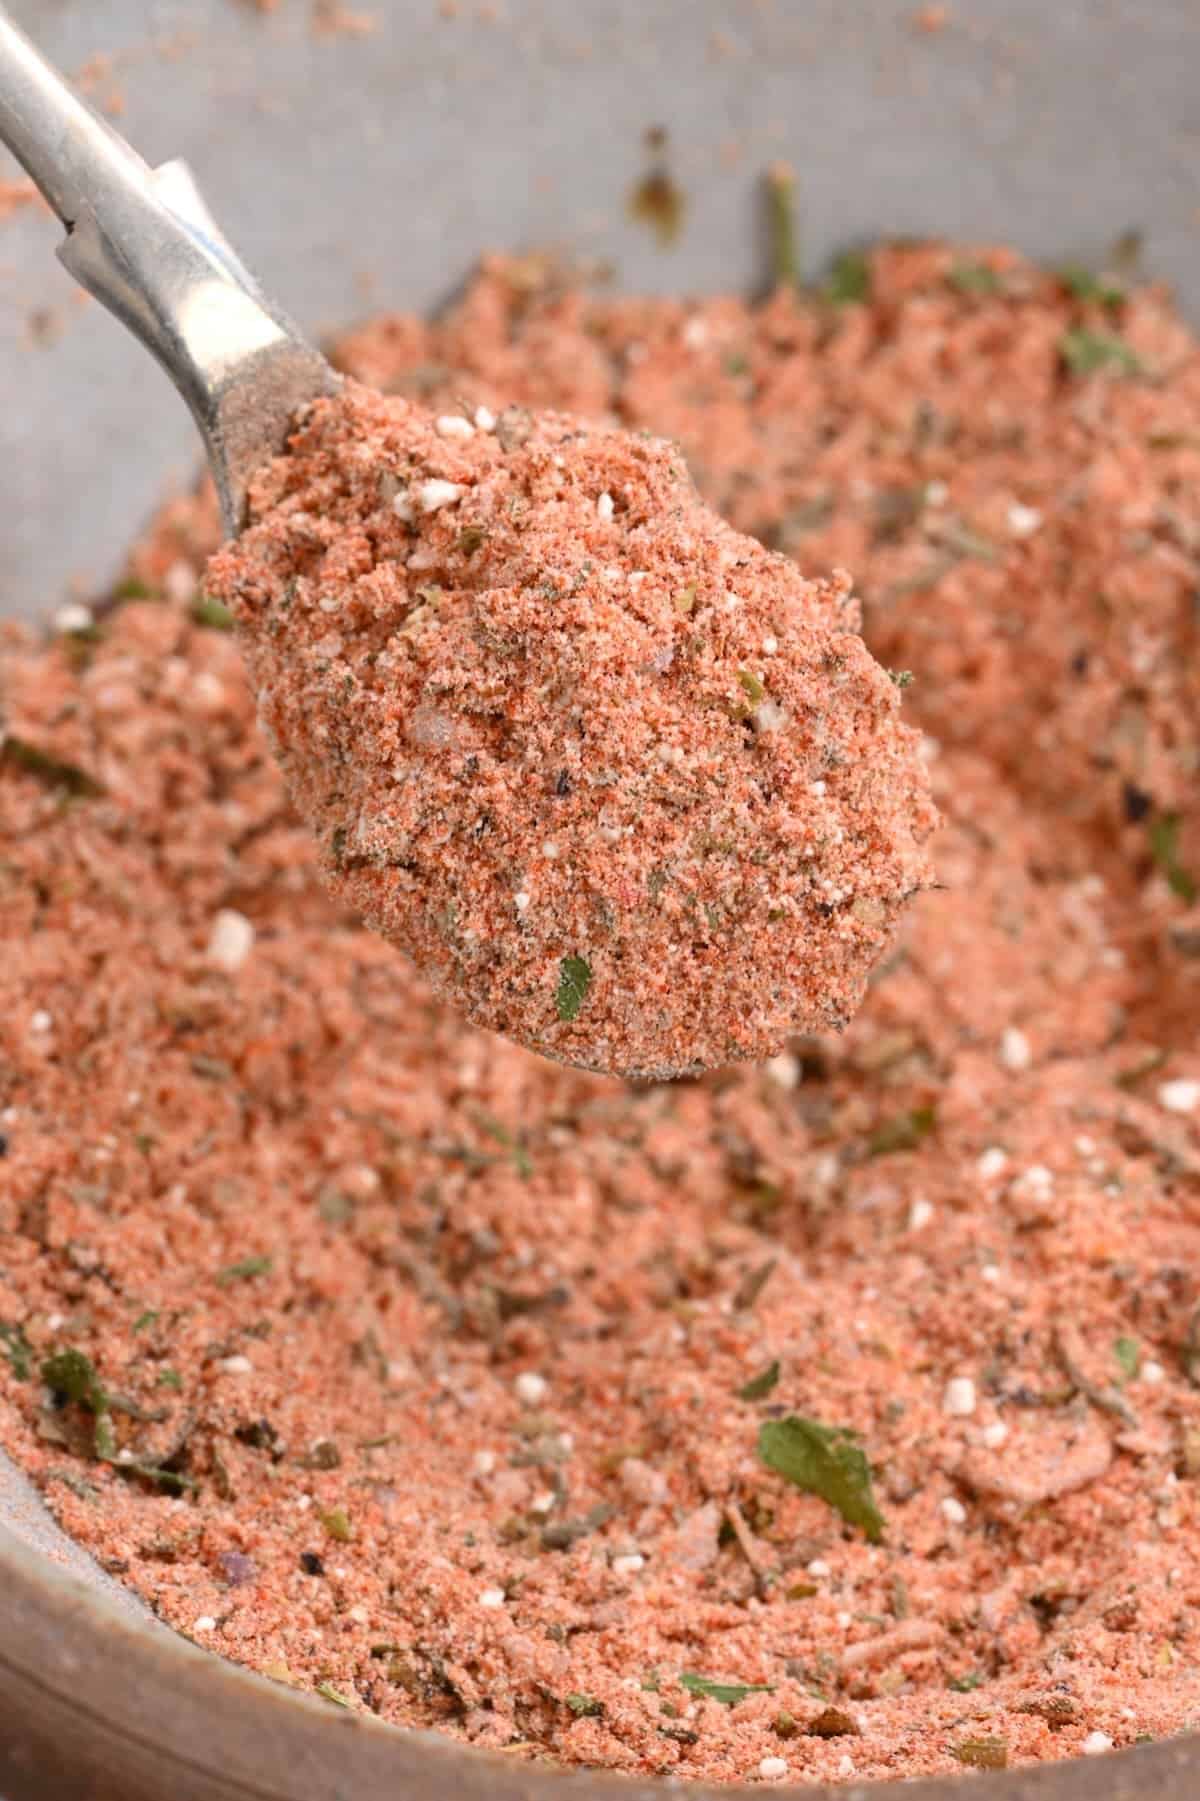 French Fry Seasoning Recipe - great for twice fried french fries!